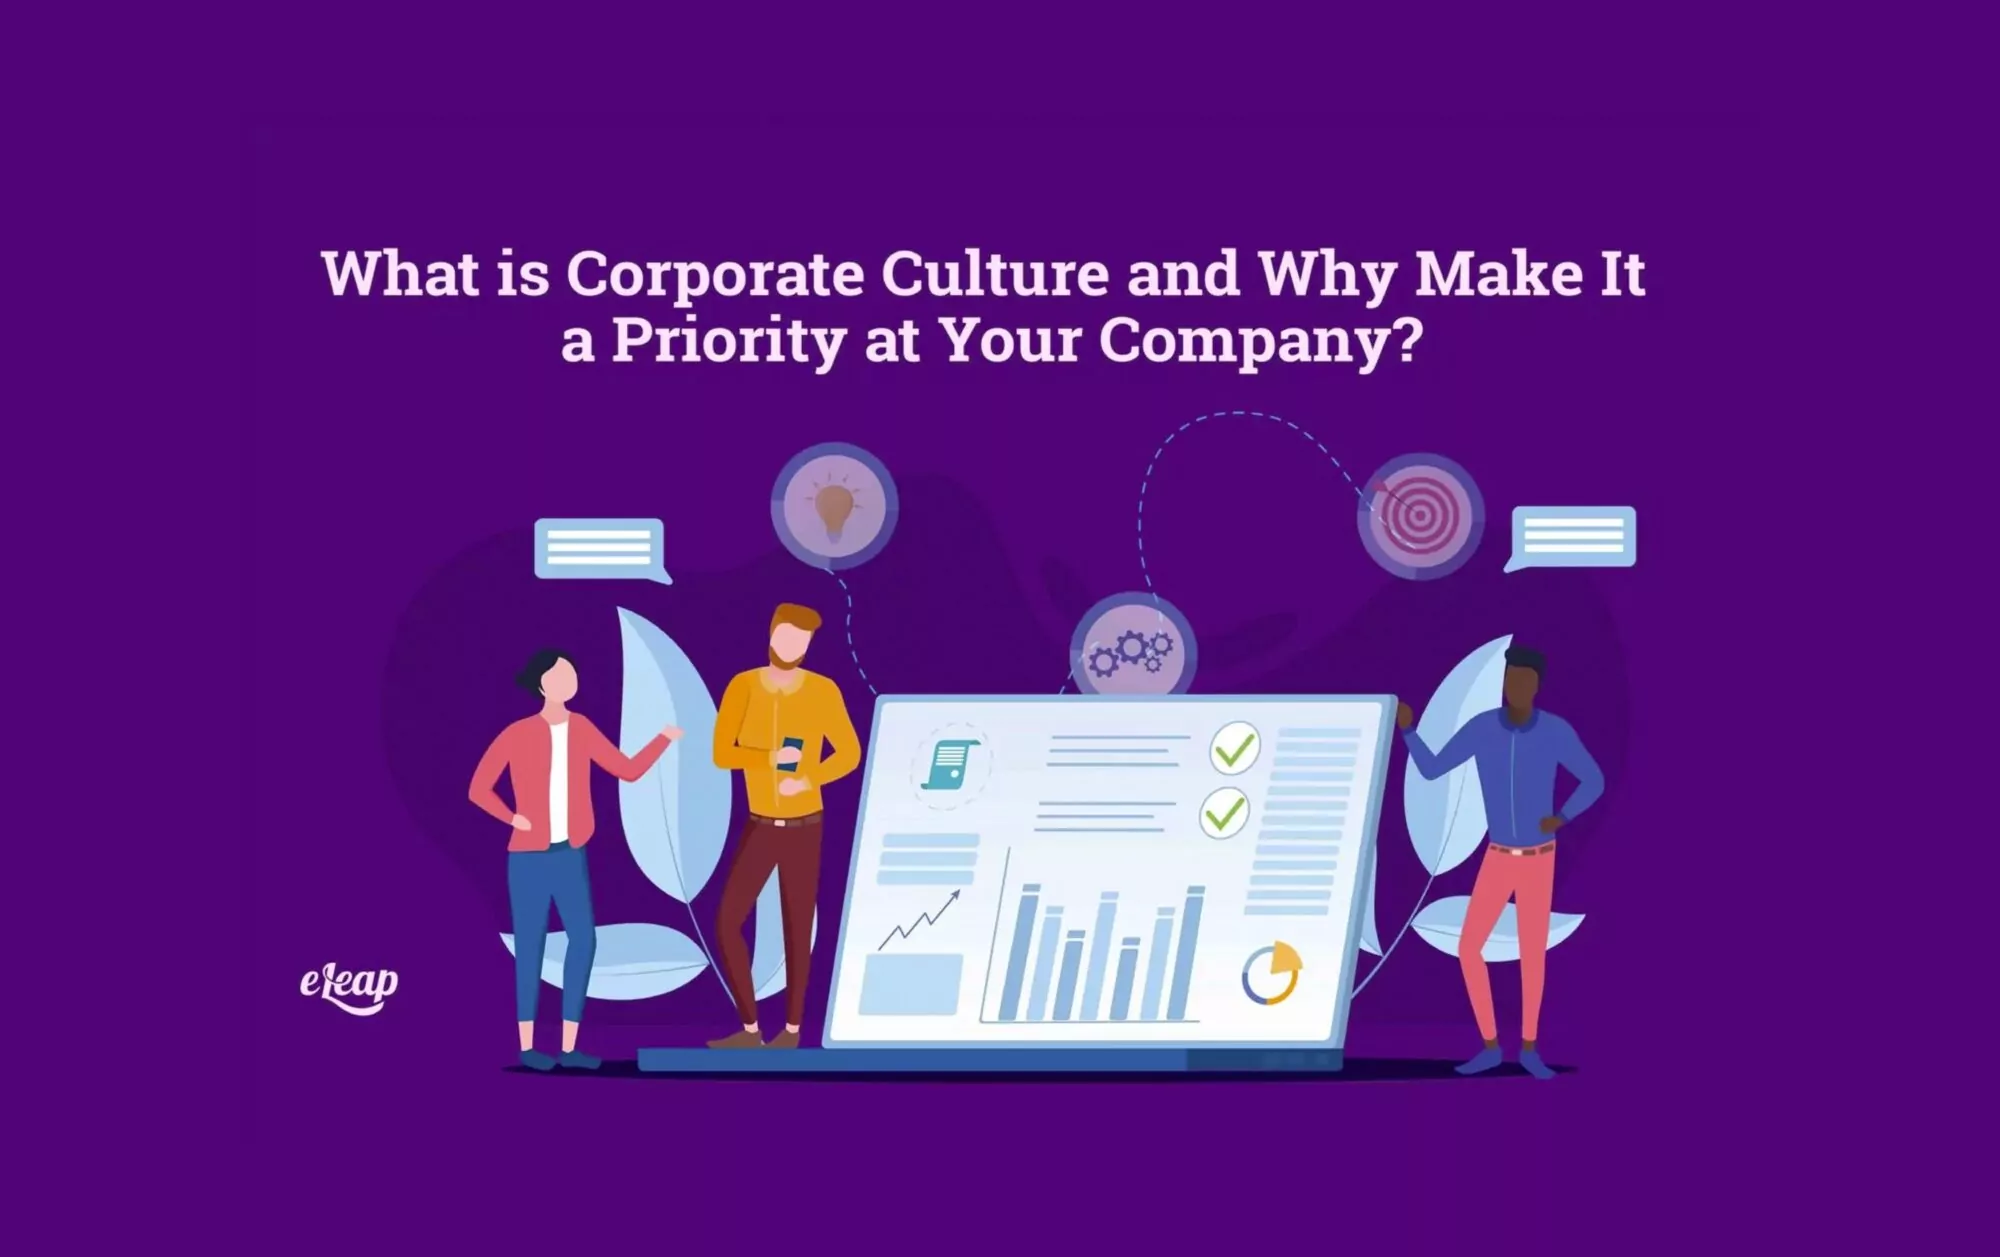 What is Corporate Culture and Why Make It a Priority at Your Company?